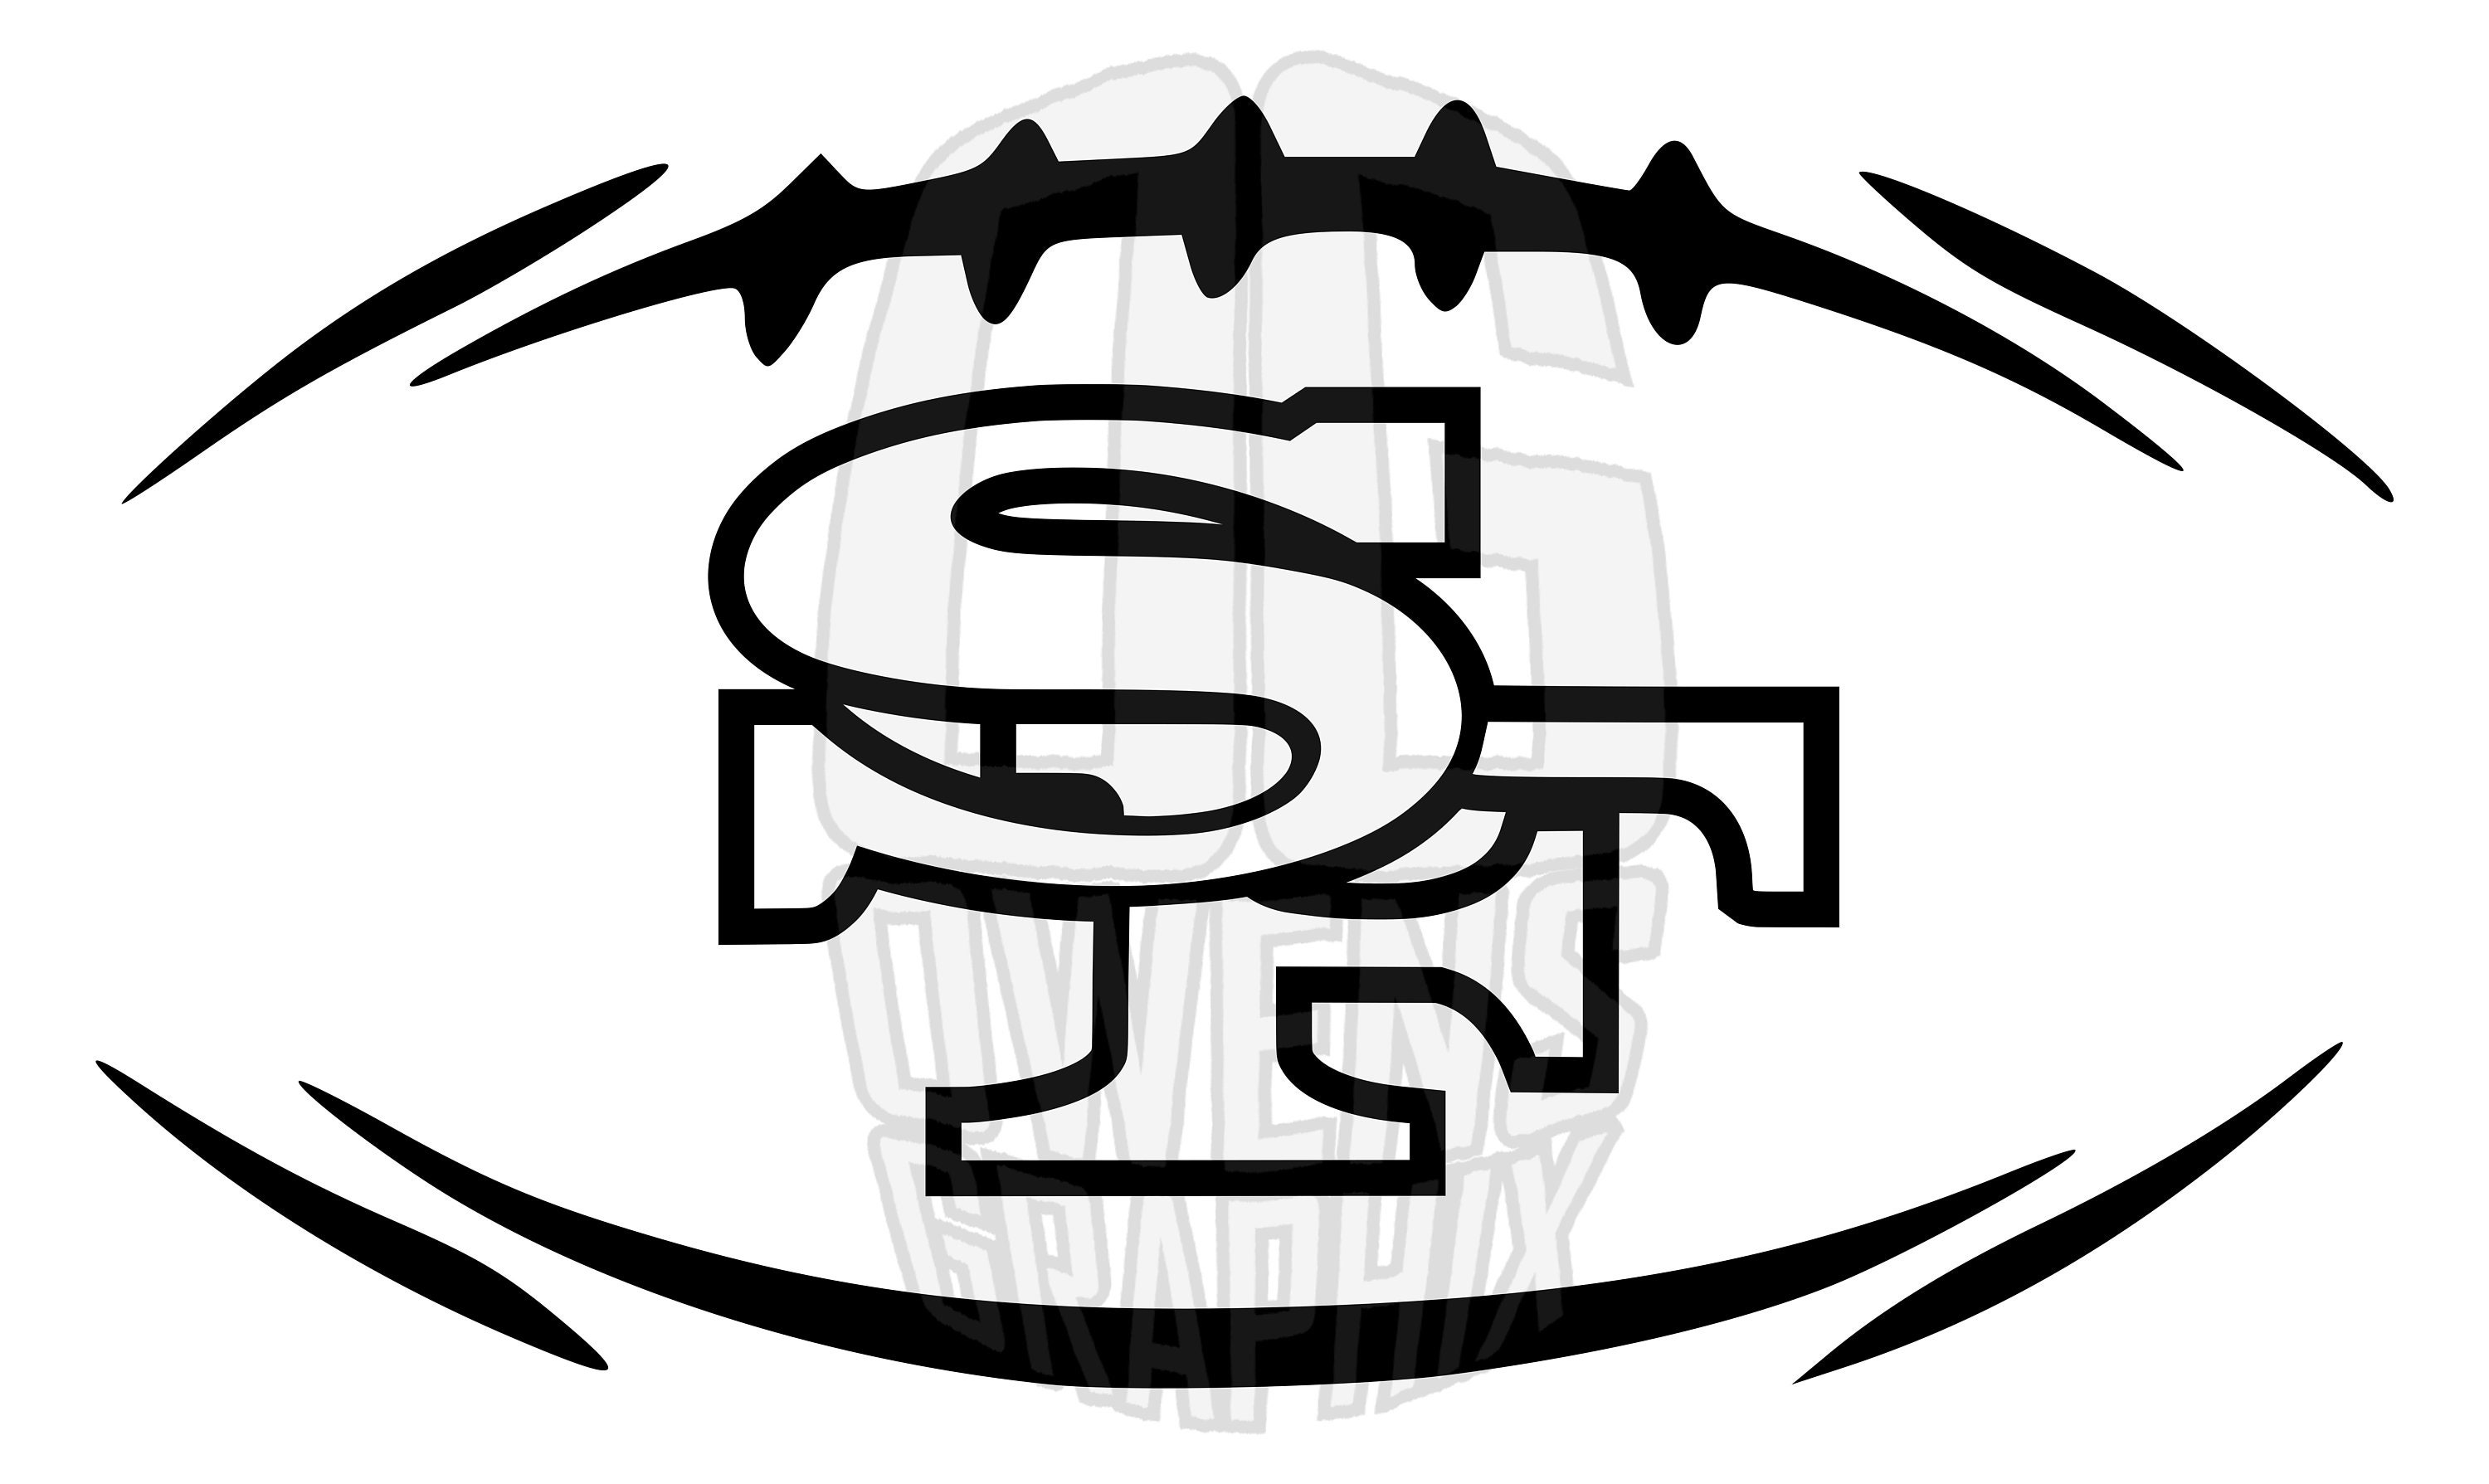 San Francisco 49ers Football Cake Topper Decoration Party Supplies 